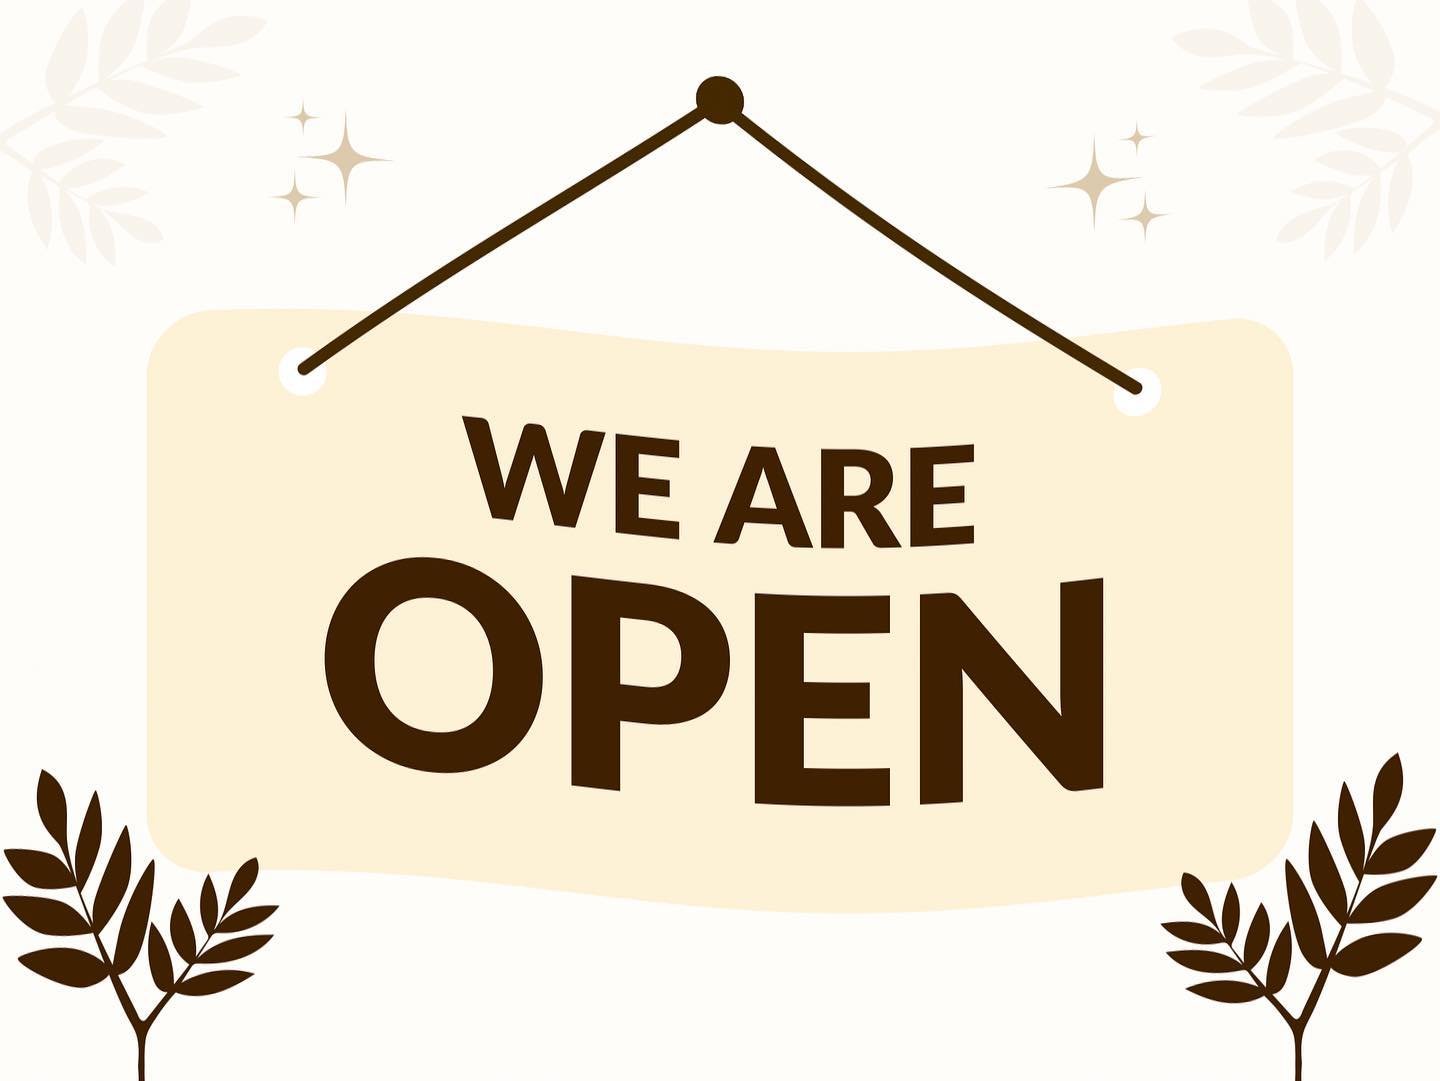 We are open today 2pm-7pm. Swing on by for a beverage and tasty bite. 🐰 🐣 🥃.
&hellip;
3610 Bridgeport Way W
Univ. Place, WA 98466
&hellip;
#LandCraftedOceanAged #BoathouseBourbon #CraftCocktails #Bourbon #Whiskey #Gin #Vodka #UniversityPlace #Taco